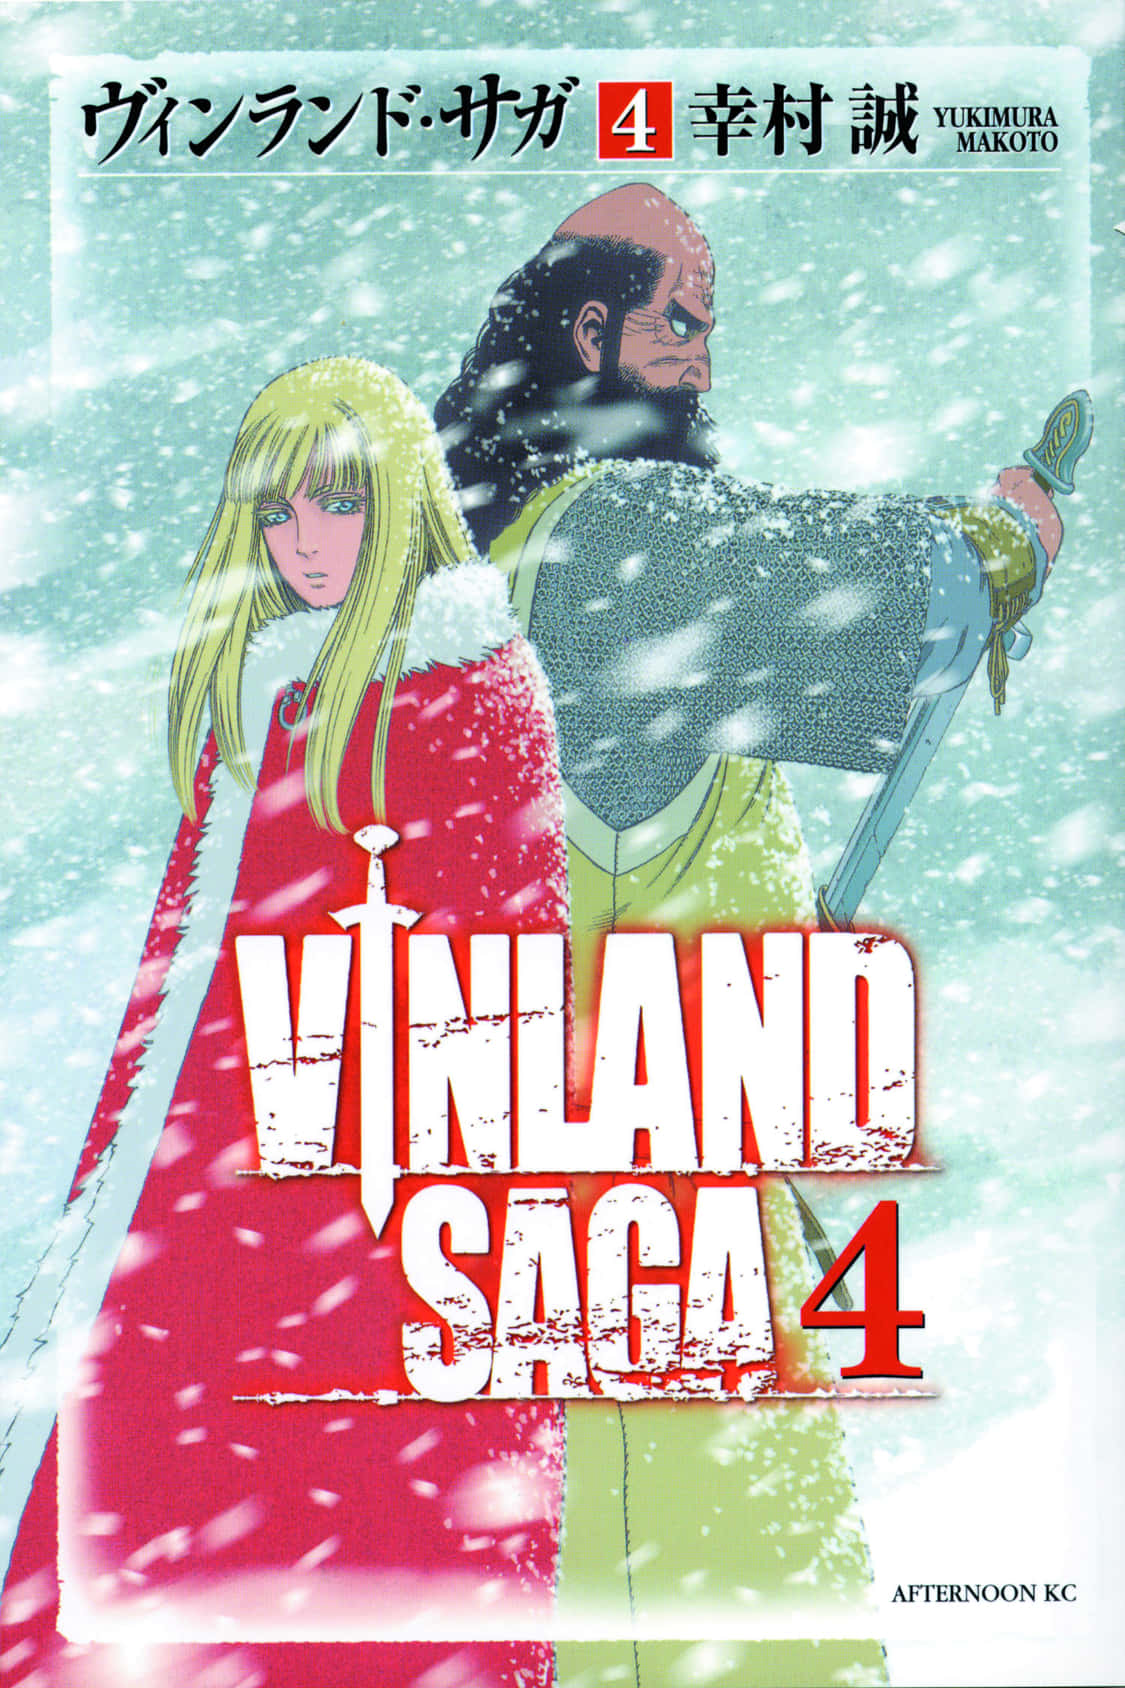 Follow Thorfinn on his incredible journey of exploration and revenge in Vinland Saga.